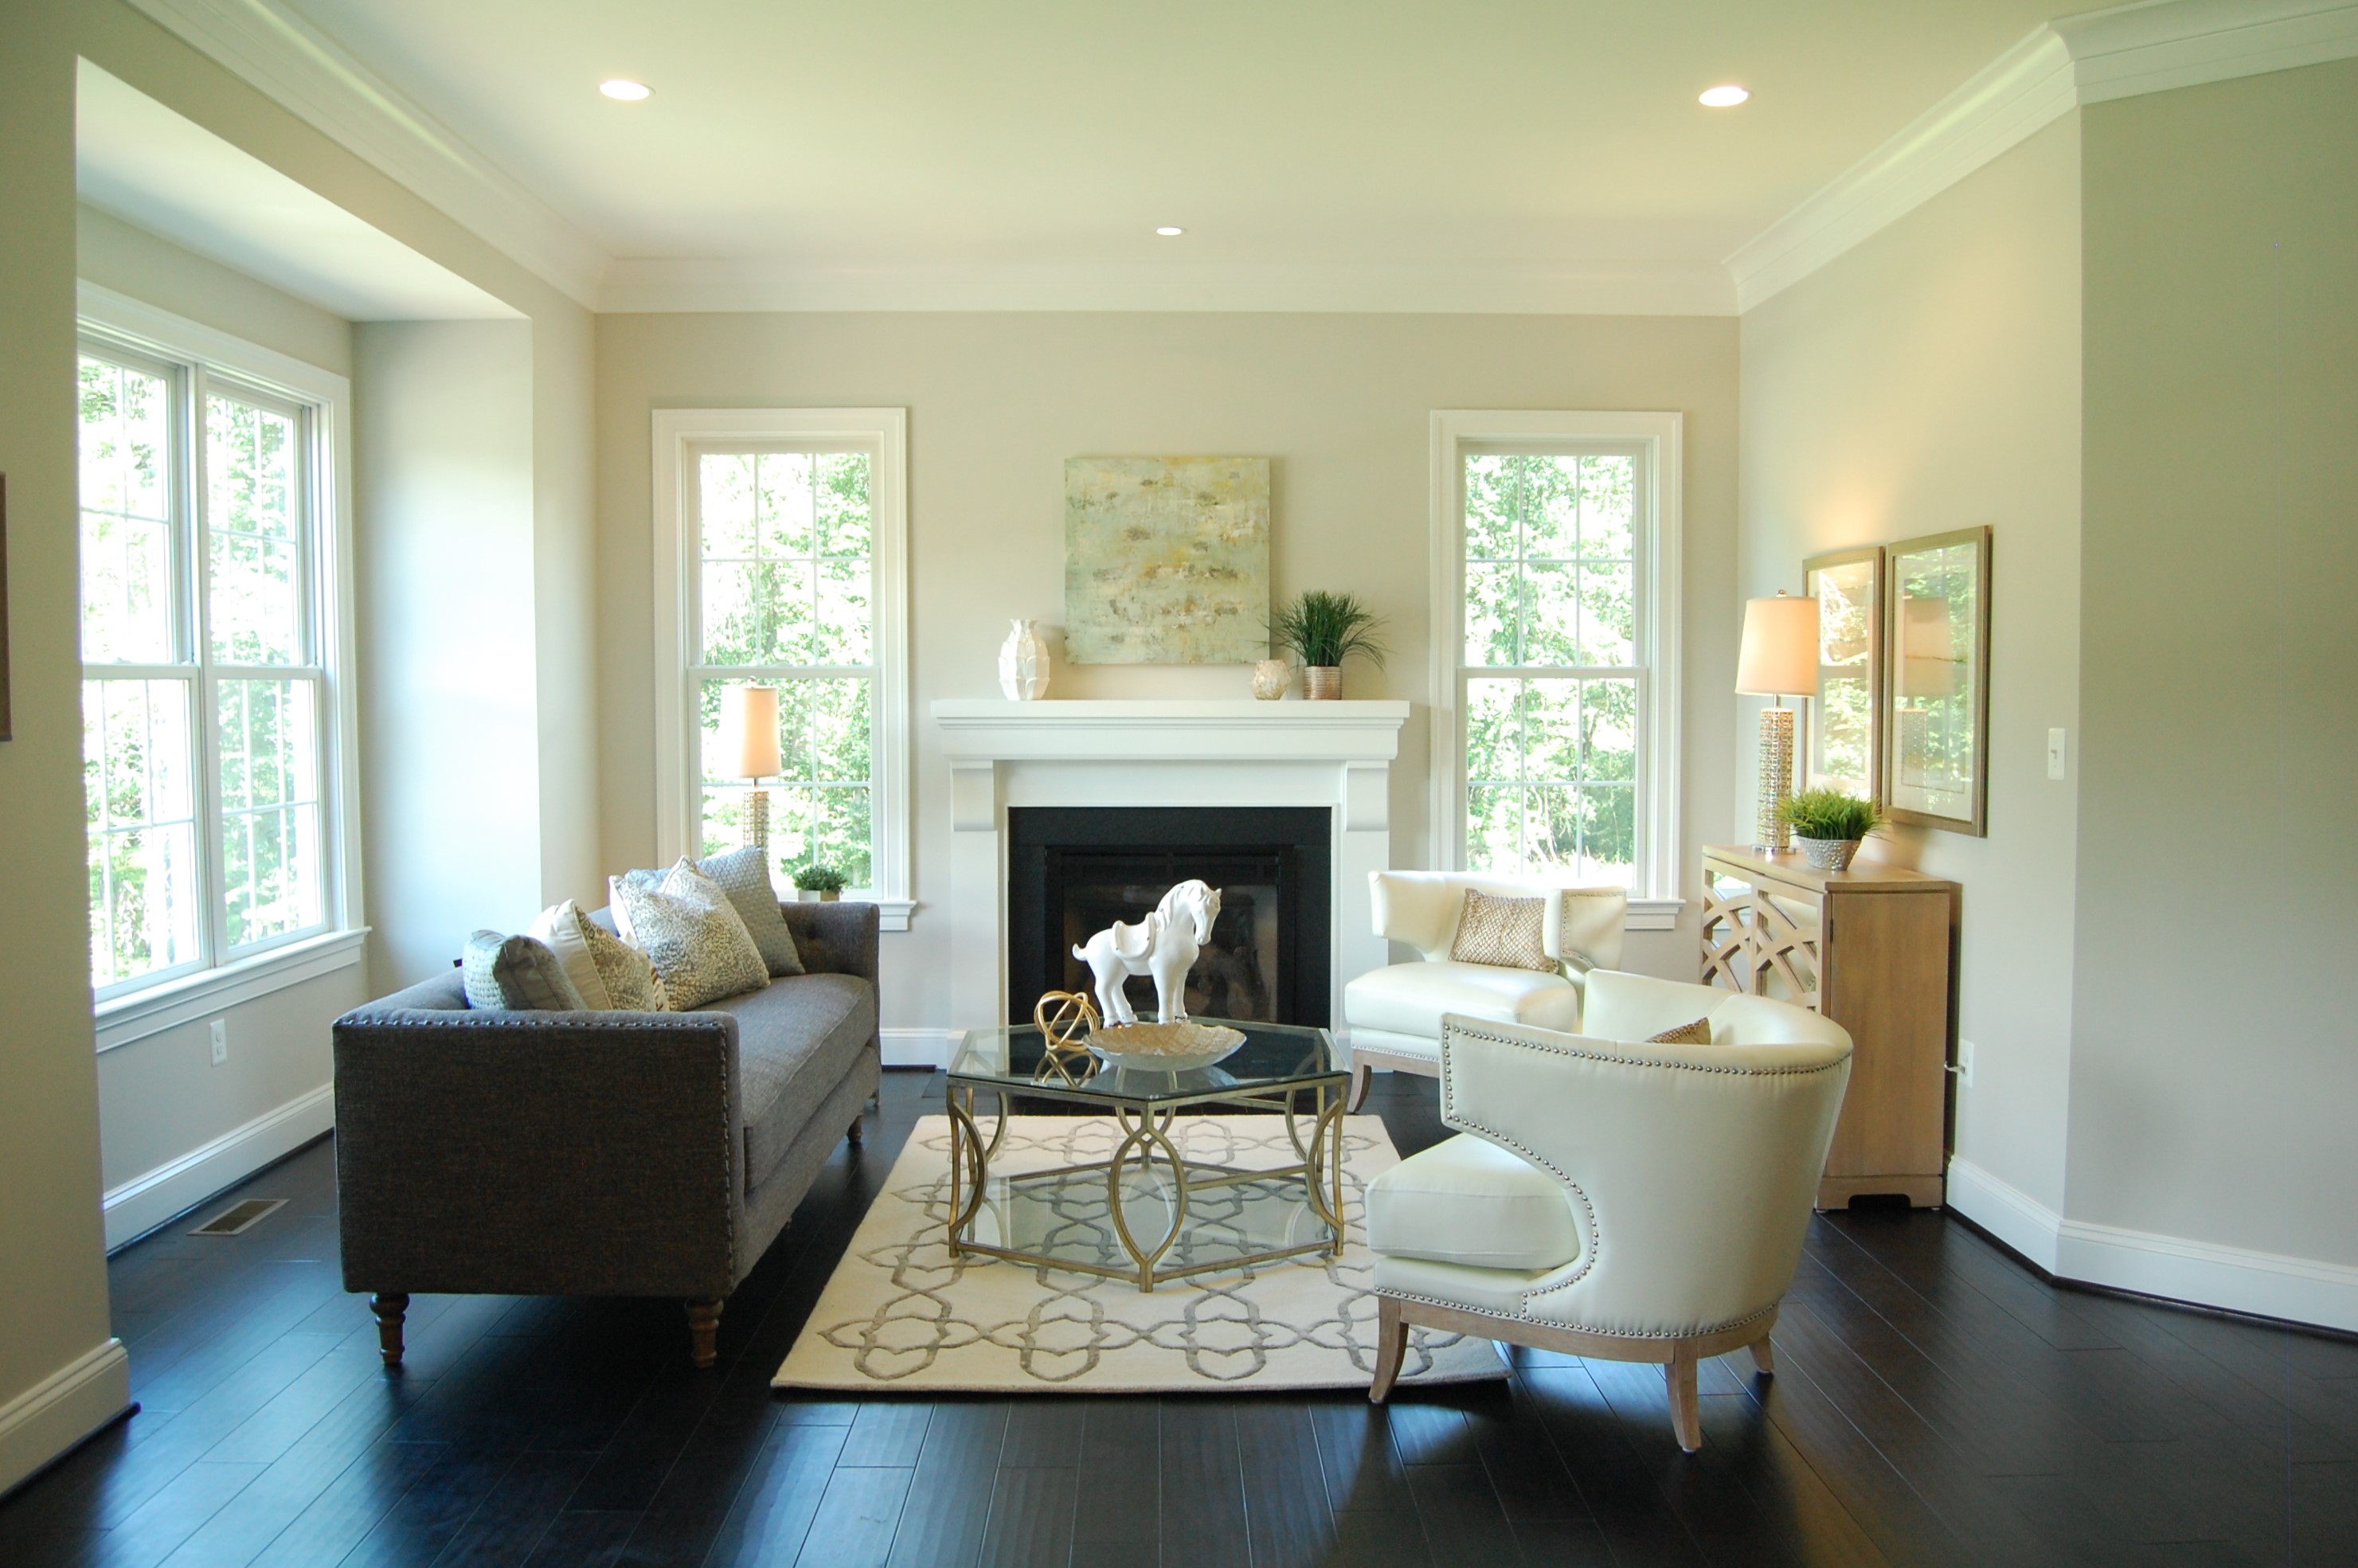 Home Staging Tips That Work